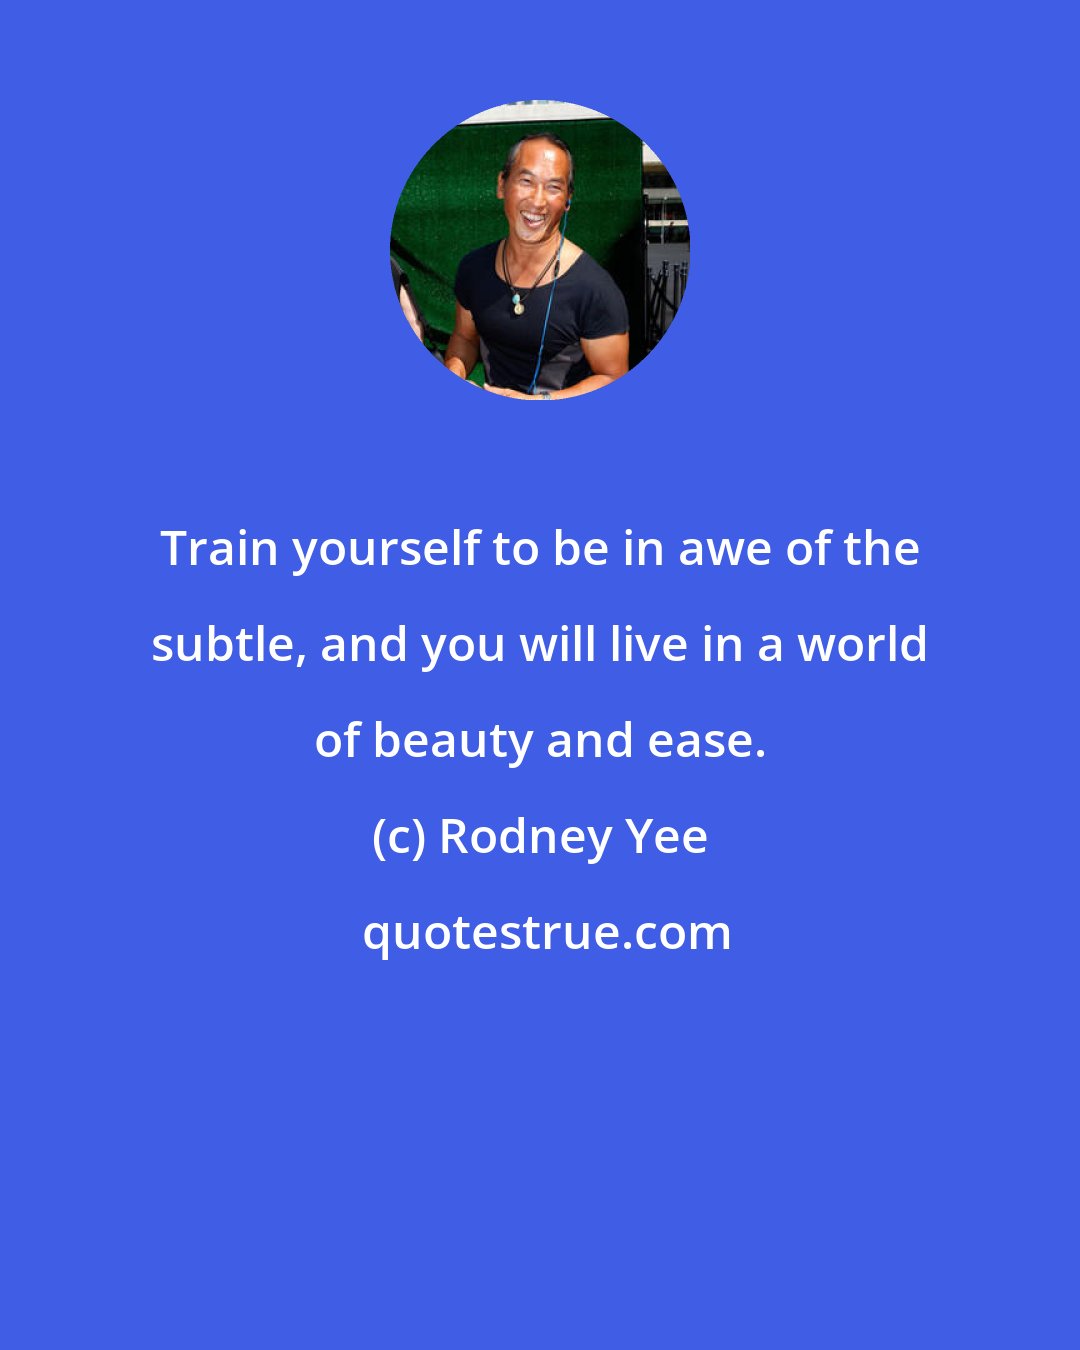 Rodney Yee: Train yourself to be in awe of the subtle, and you will live in a world of beauty and ease.